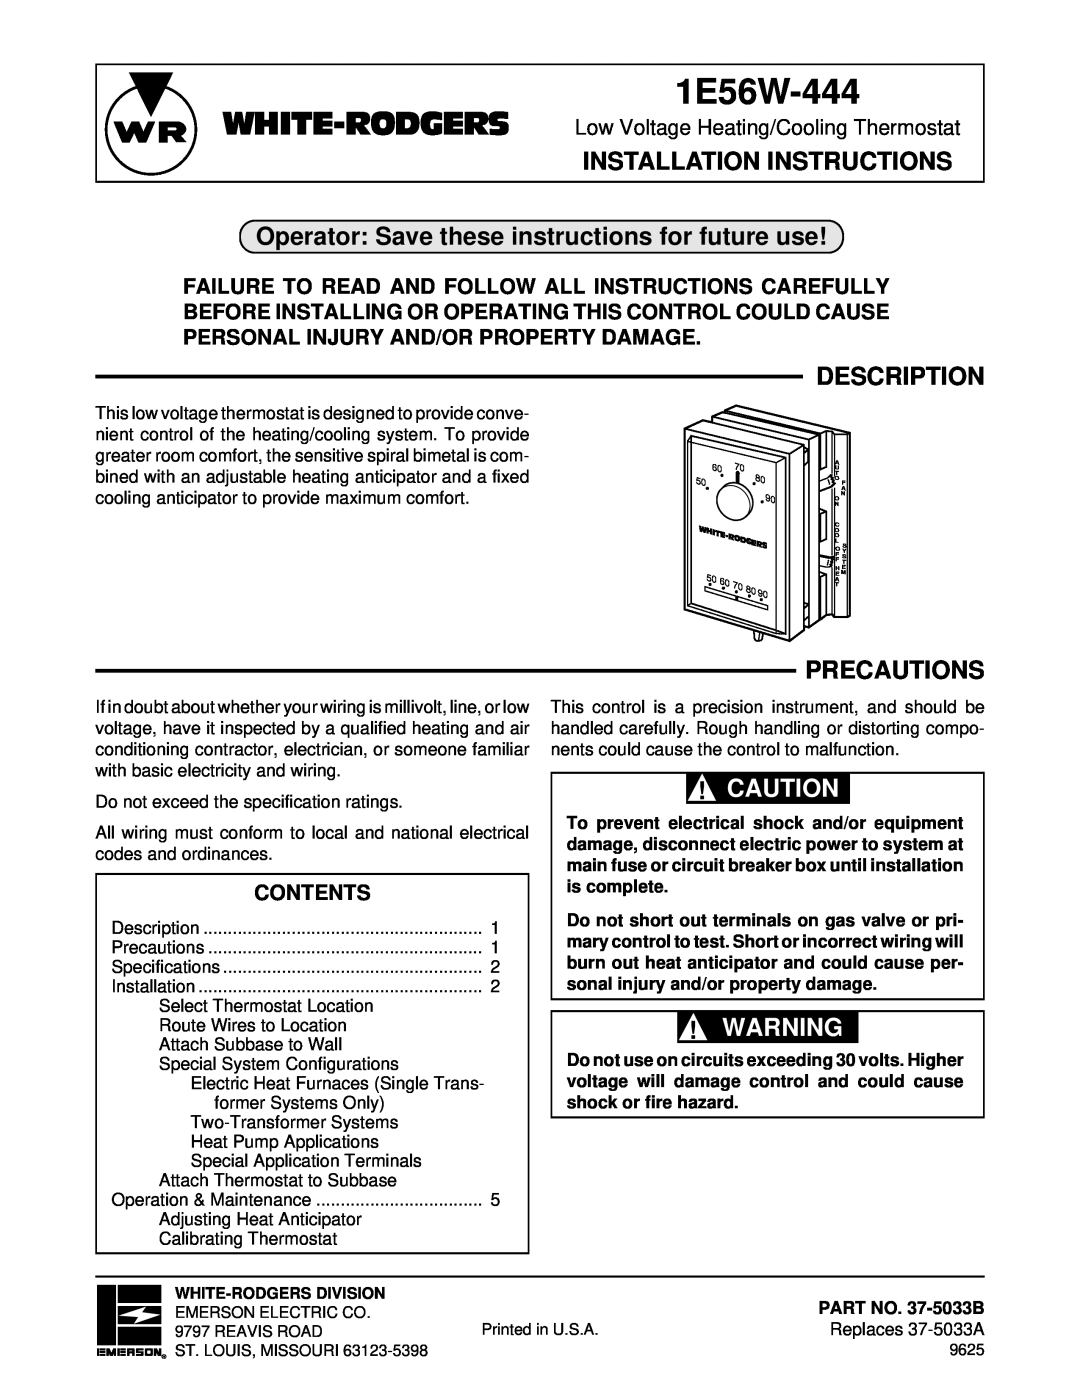 White Rodgers 1E56W-444 installation instructions Installation Instructions, Description, Precautions, Contents 